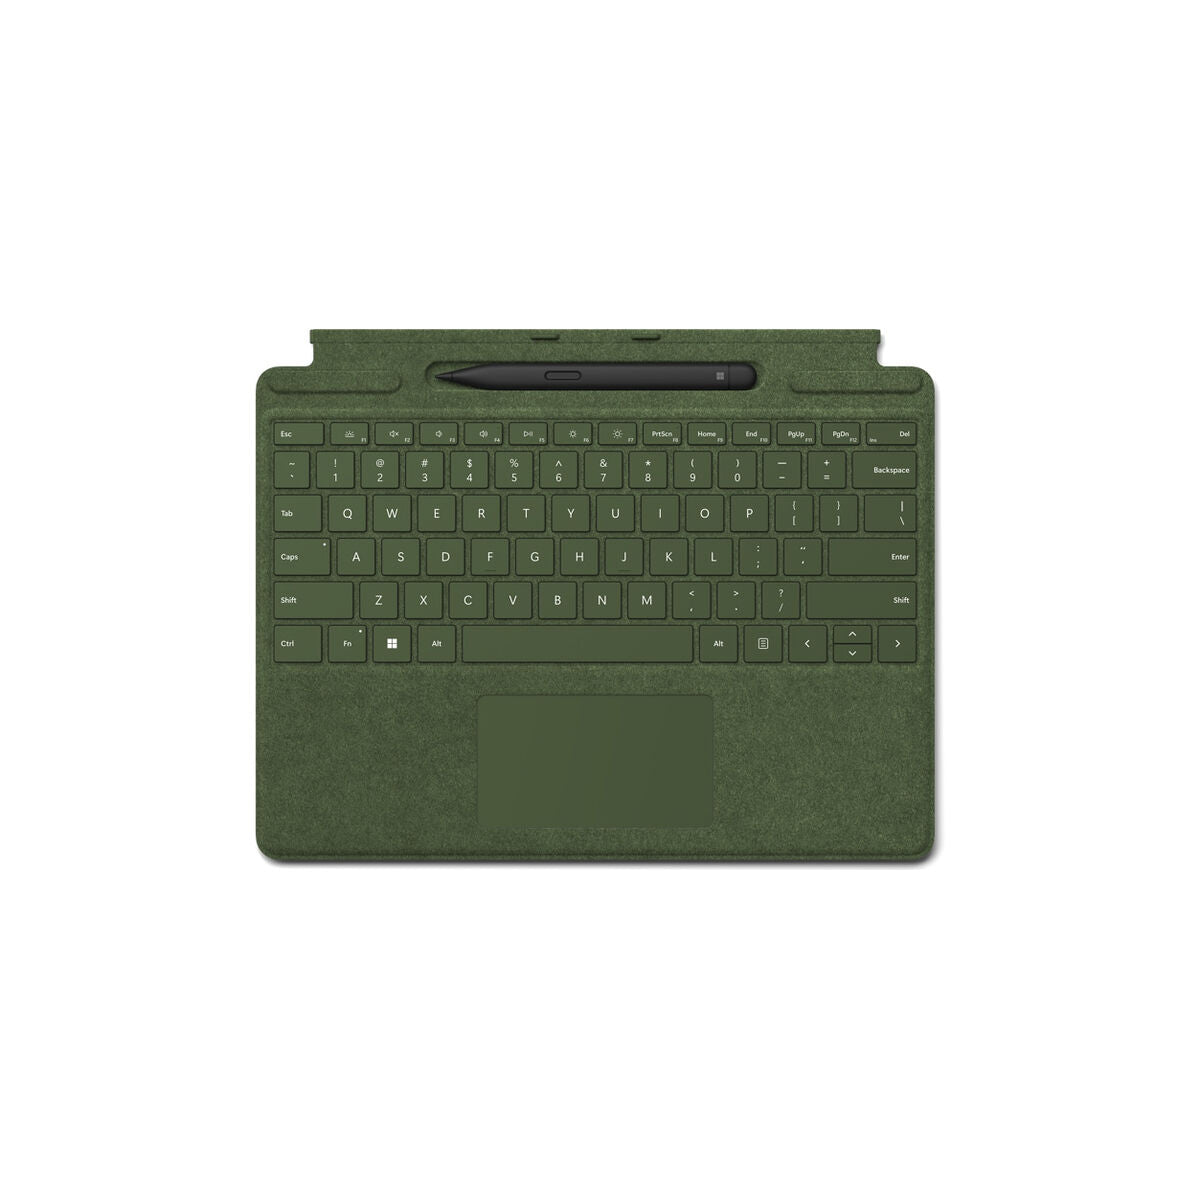 Bluetooth Keyboard Microsoft 8X6-00132 Spanish Qwerty, Microsoft, Computing, Accessories, bluetooth-keyboard-microsoft-8x6-00132-spanish-qwerty, :QWERTY, :Spanish, Brand_Microsoft, category-reference-2609, category-reference-2642, category-reference-2646, category-reference-t-19685, category-reference-t-19908, category-reference-t-21345, computers / peripherals, Condition_NEW, office, Price_200 - 300, RiotNook